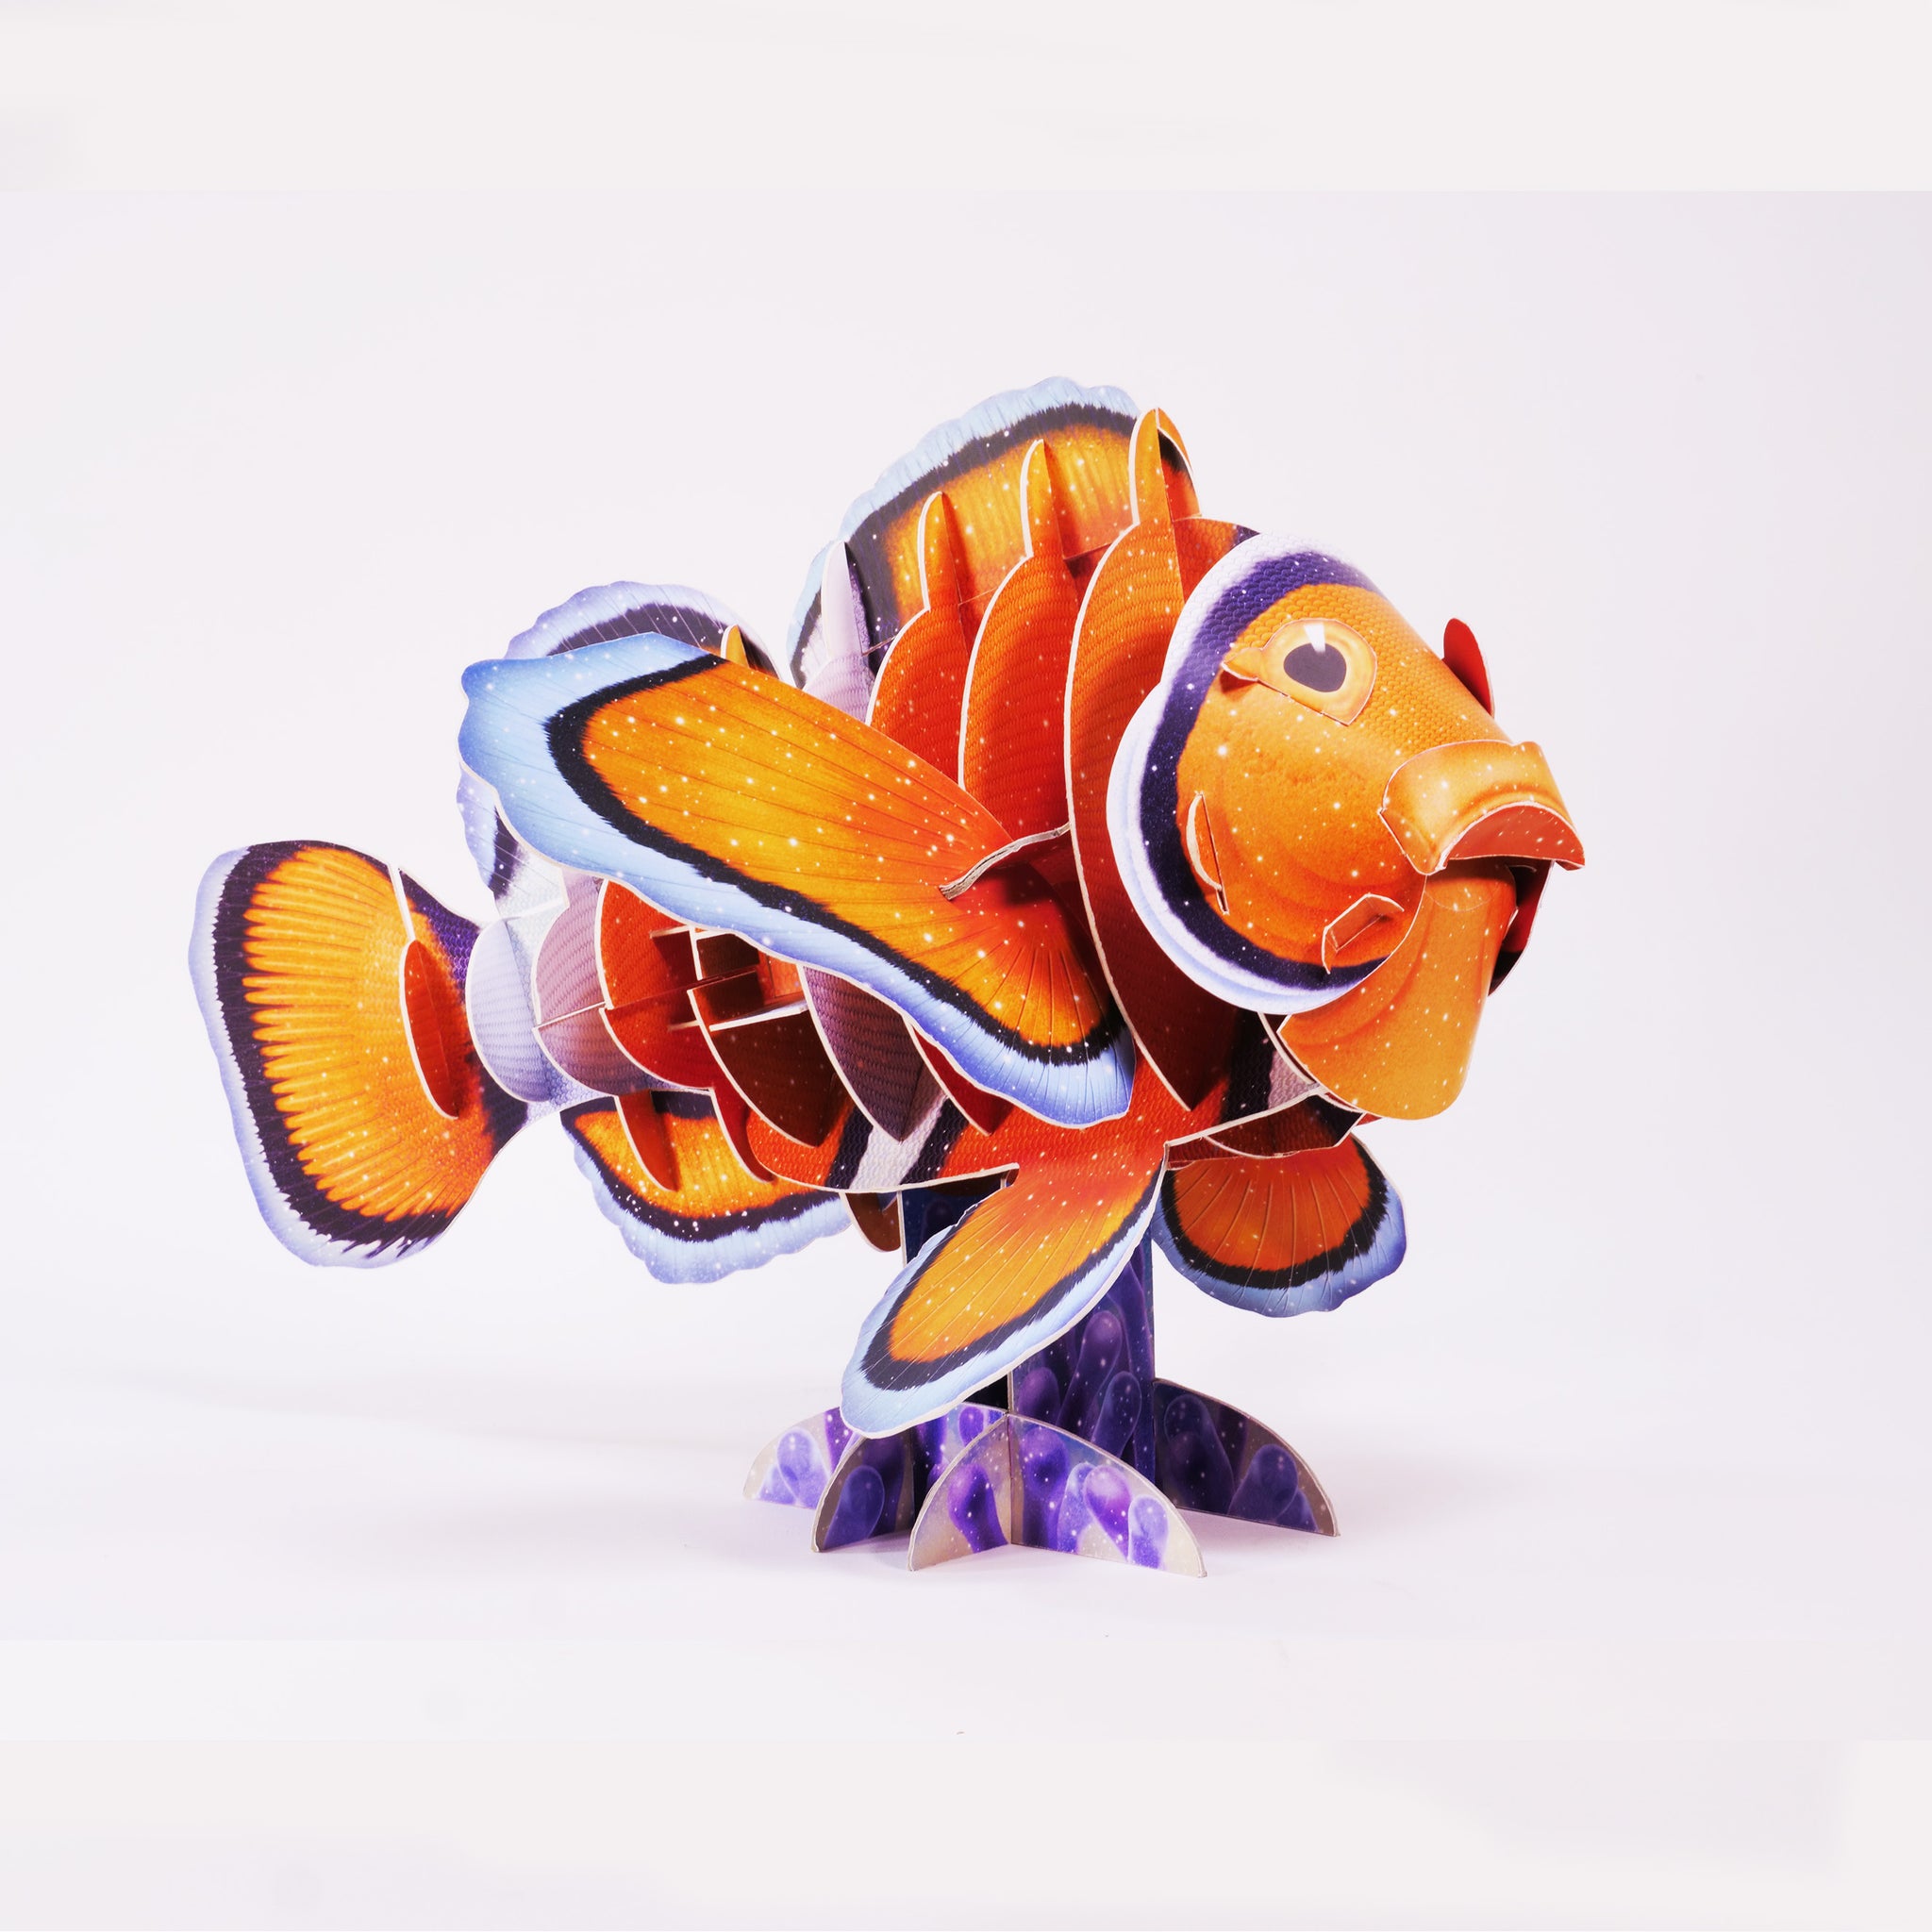 Build in 3D - Your own giant clownfish